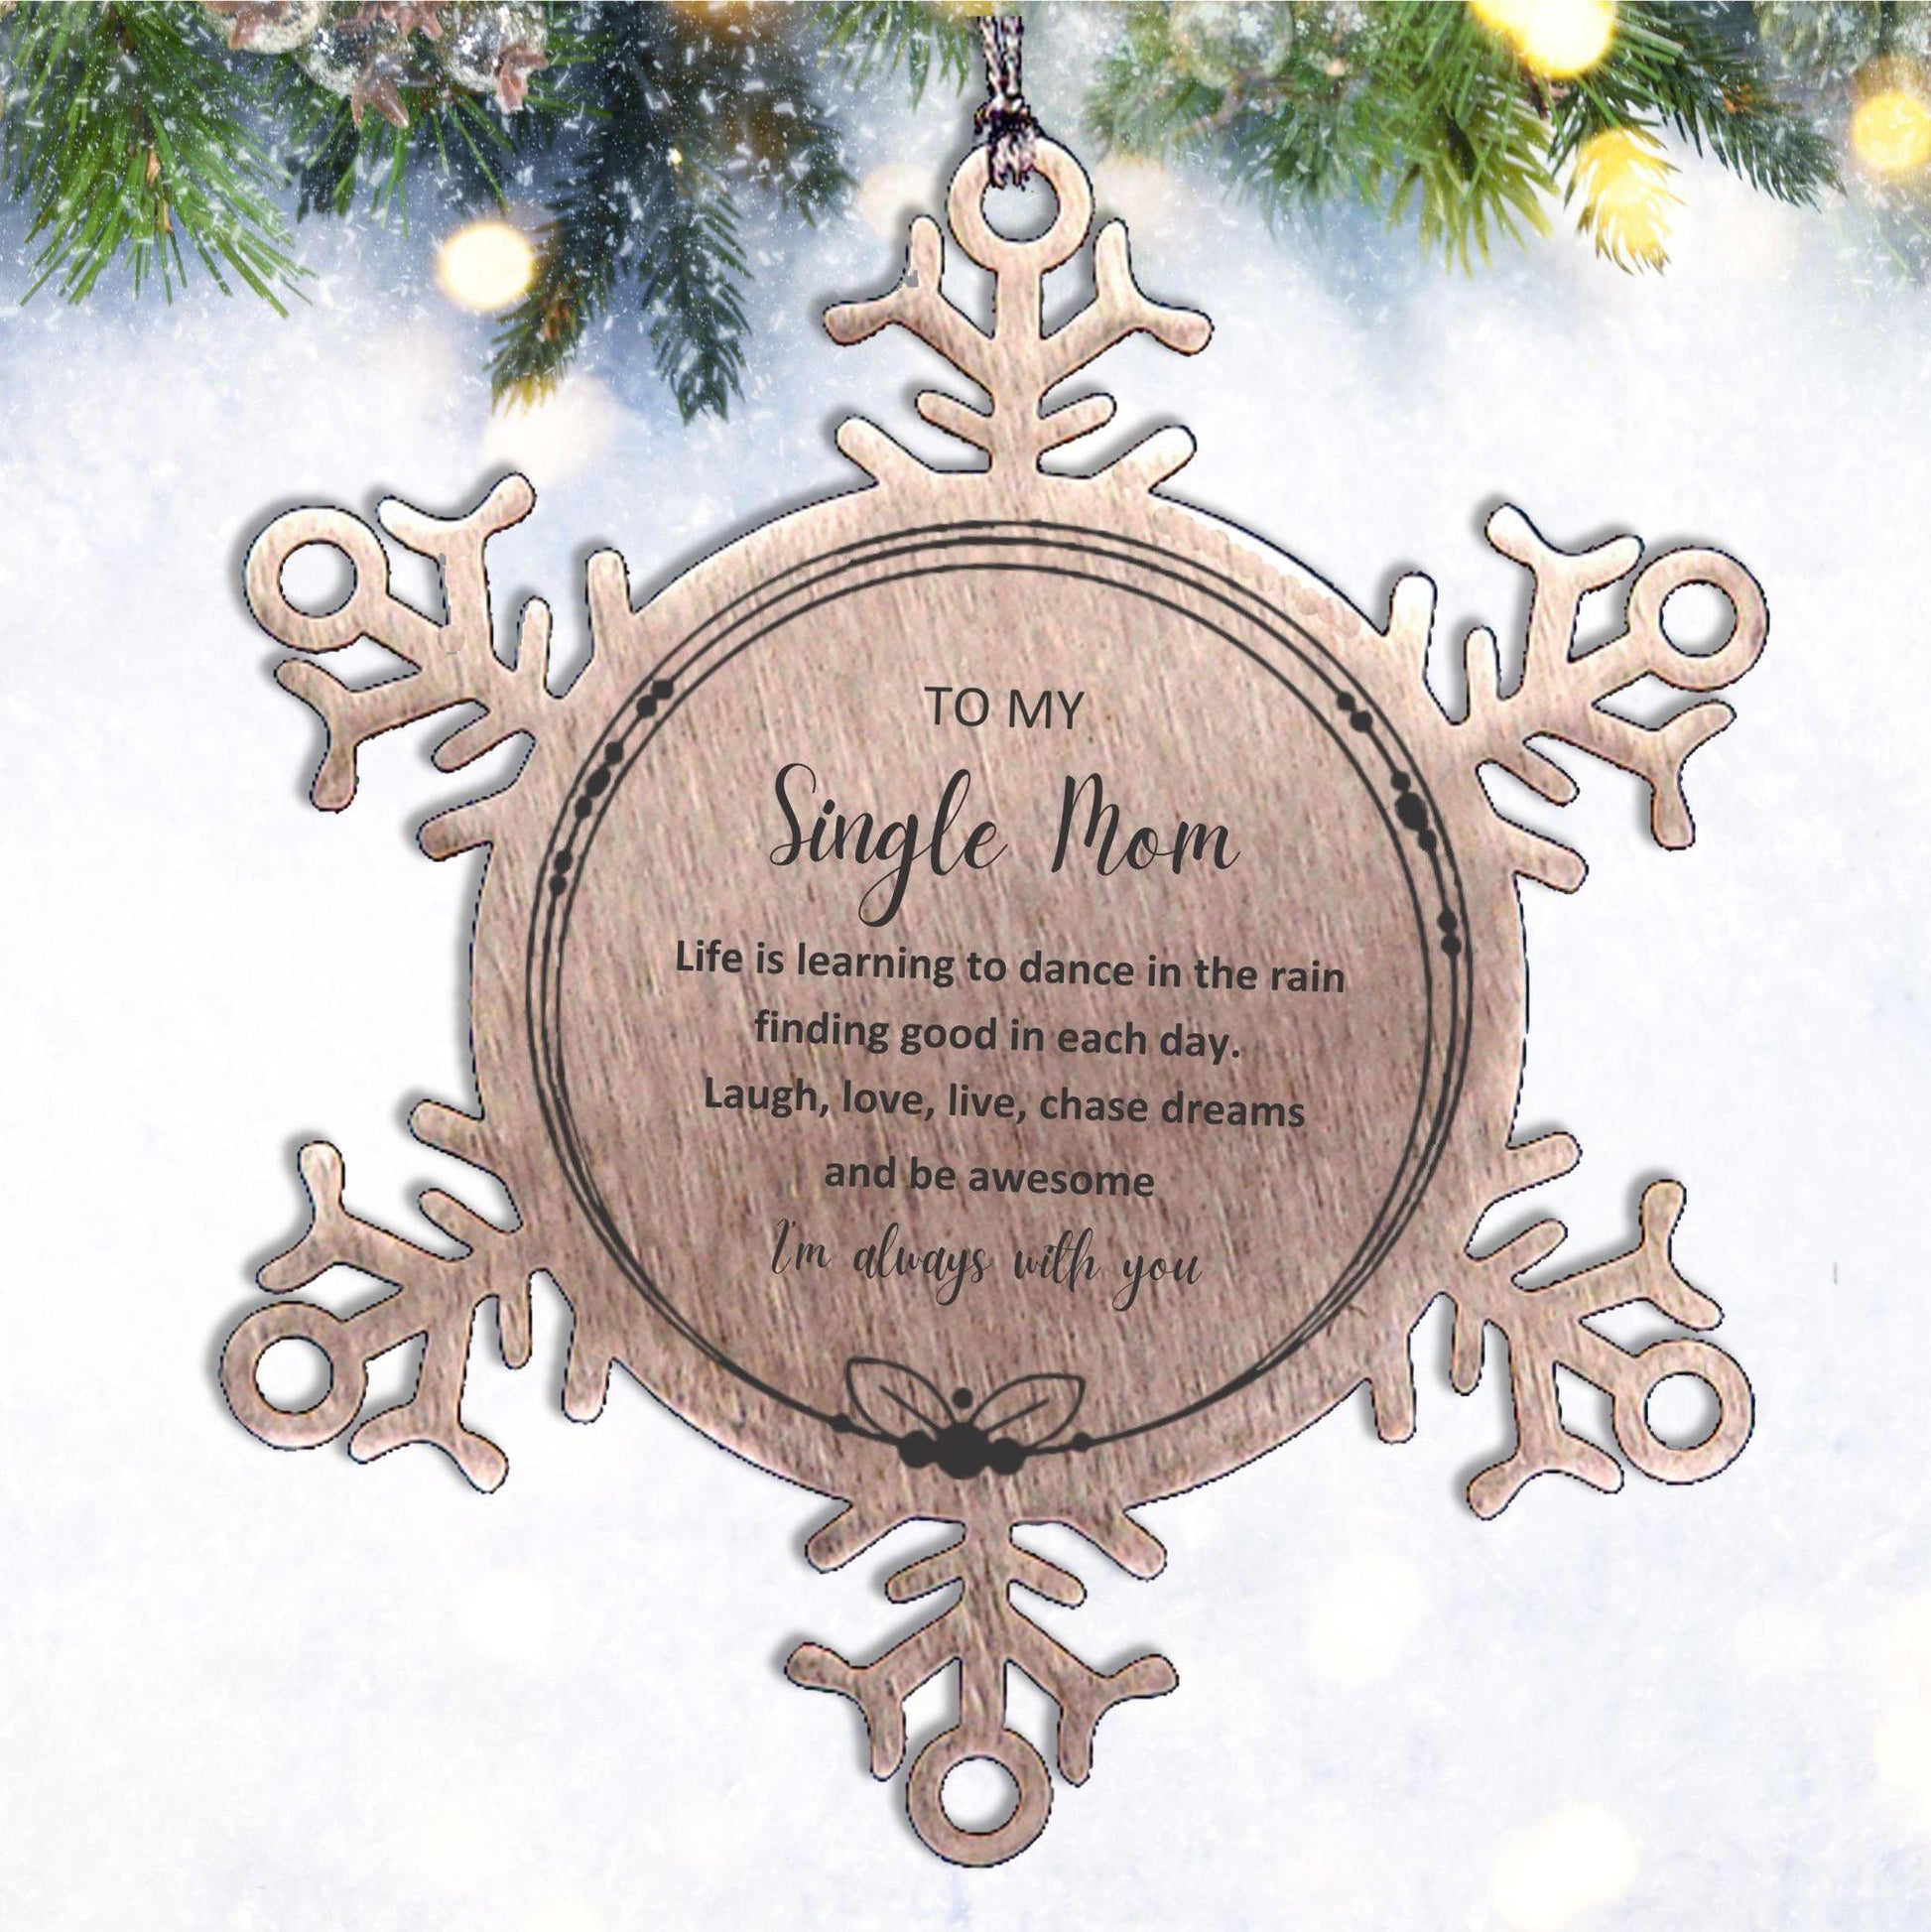 Single Mom Snowflake Ornament, Motivational Birthday Gifts - To My Single Mom Life is learning to dance in the rain, finding good in each day. I'm always with you - Mallard Moon Gift Shop